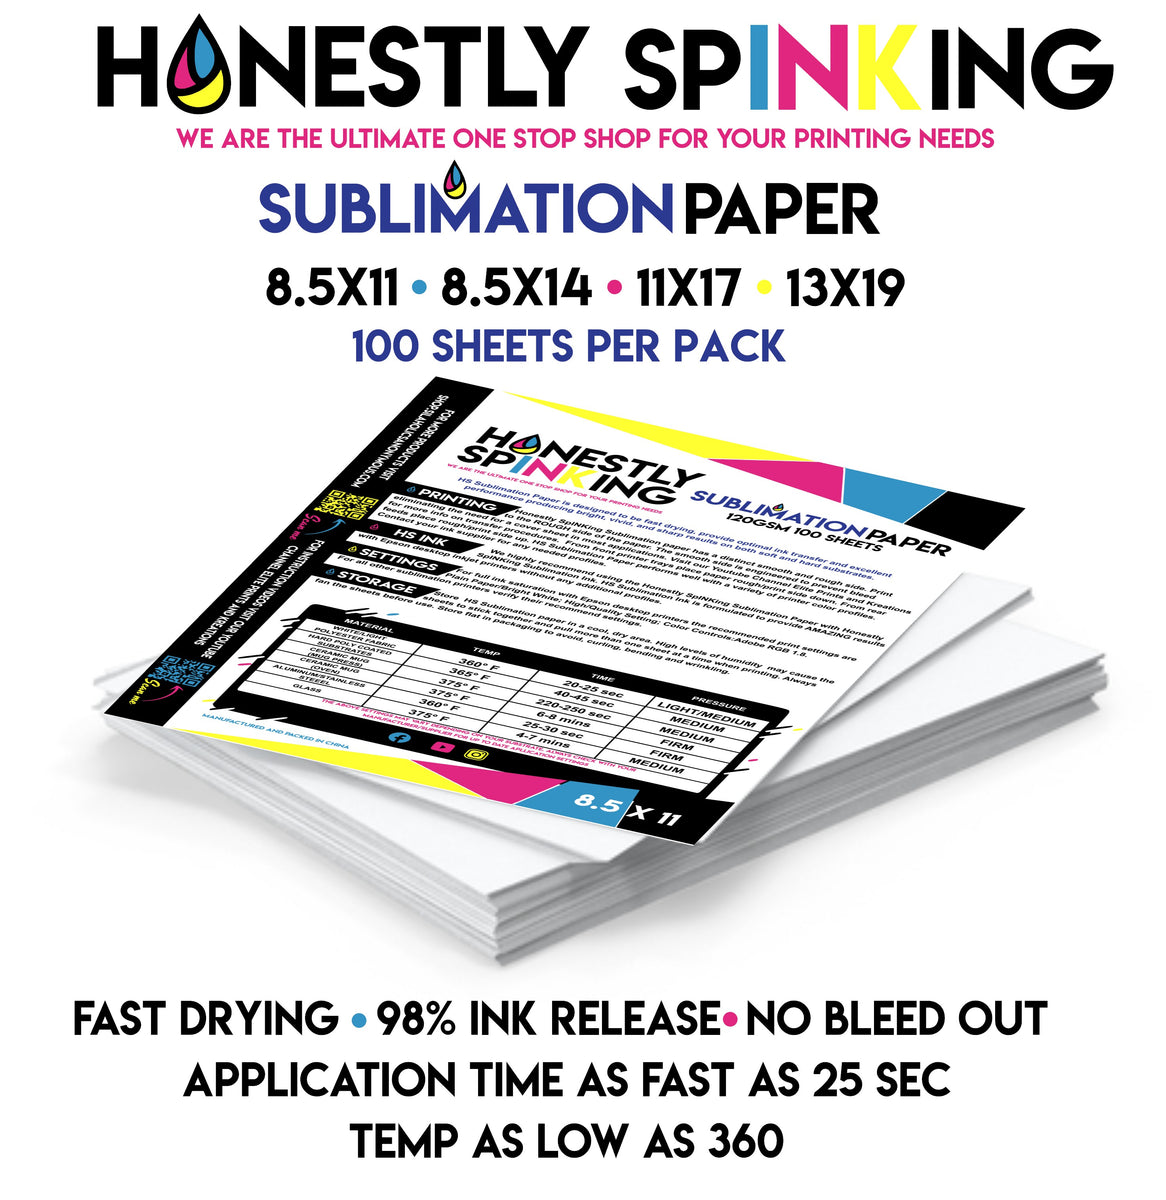 Honest Review of the A Sub Sublimation Paper 8.5 x 14 